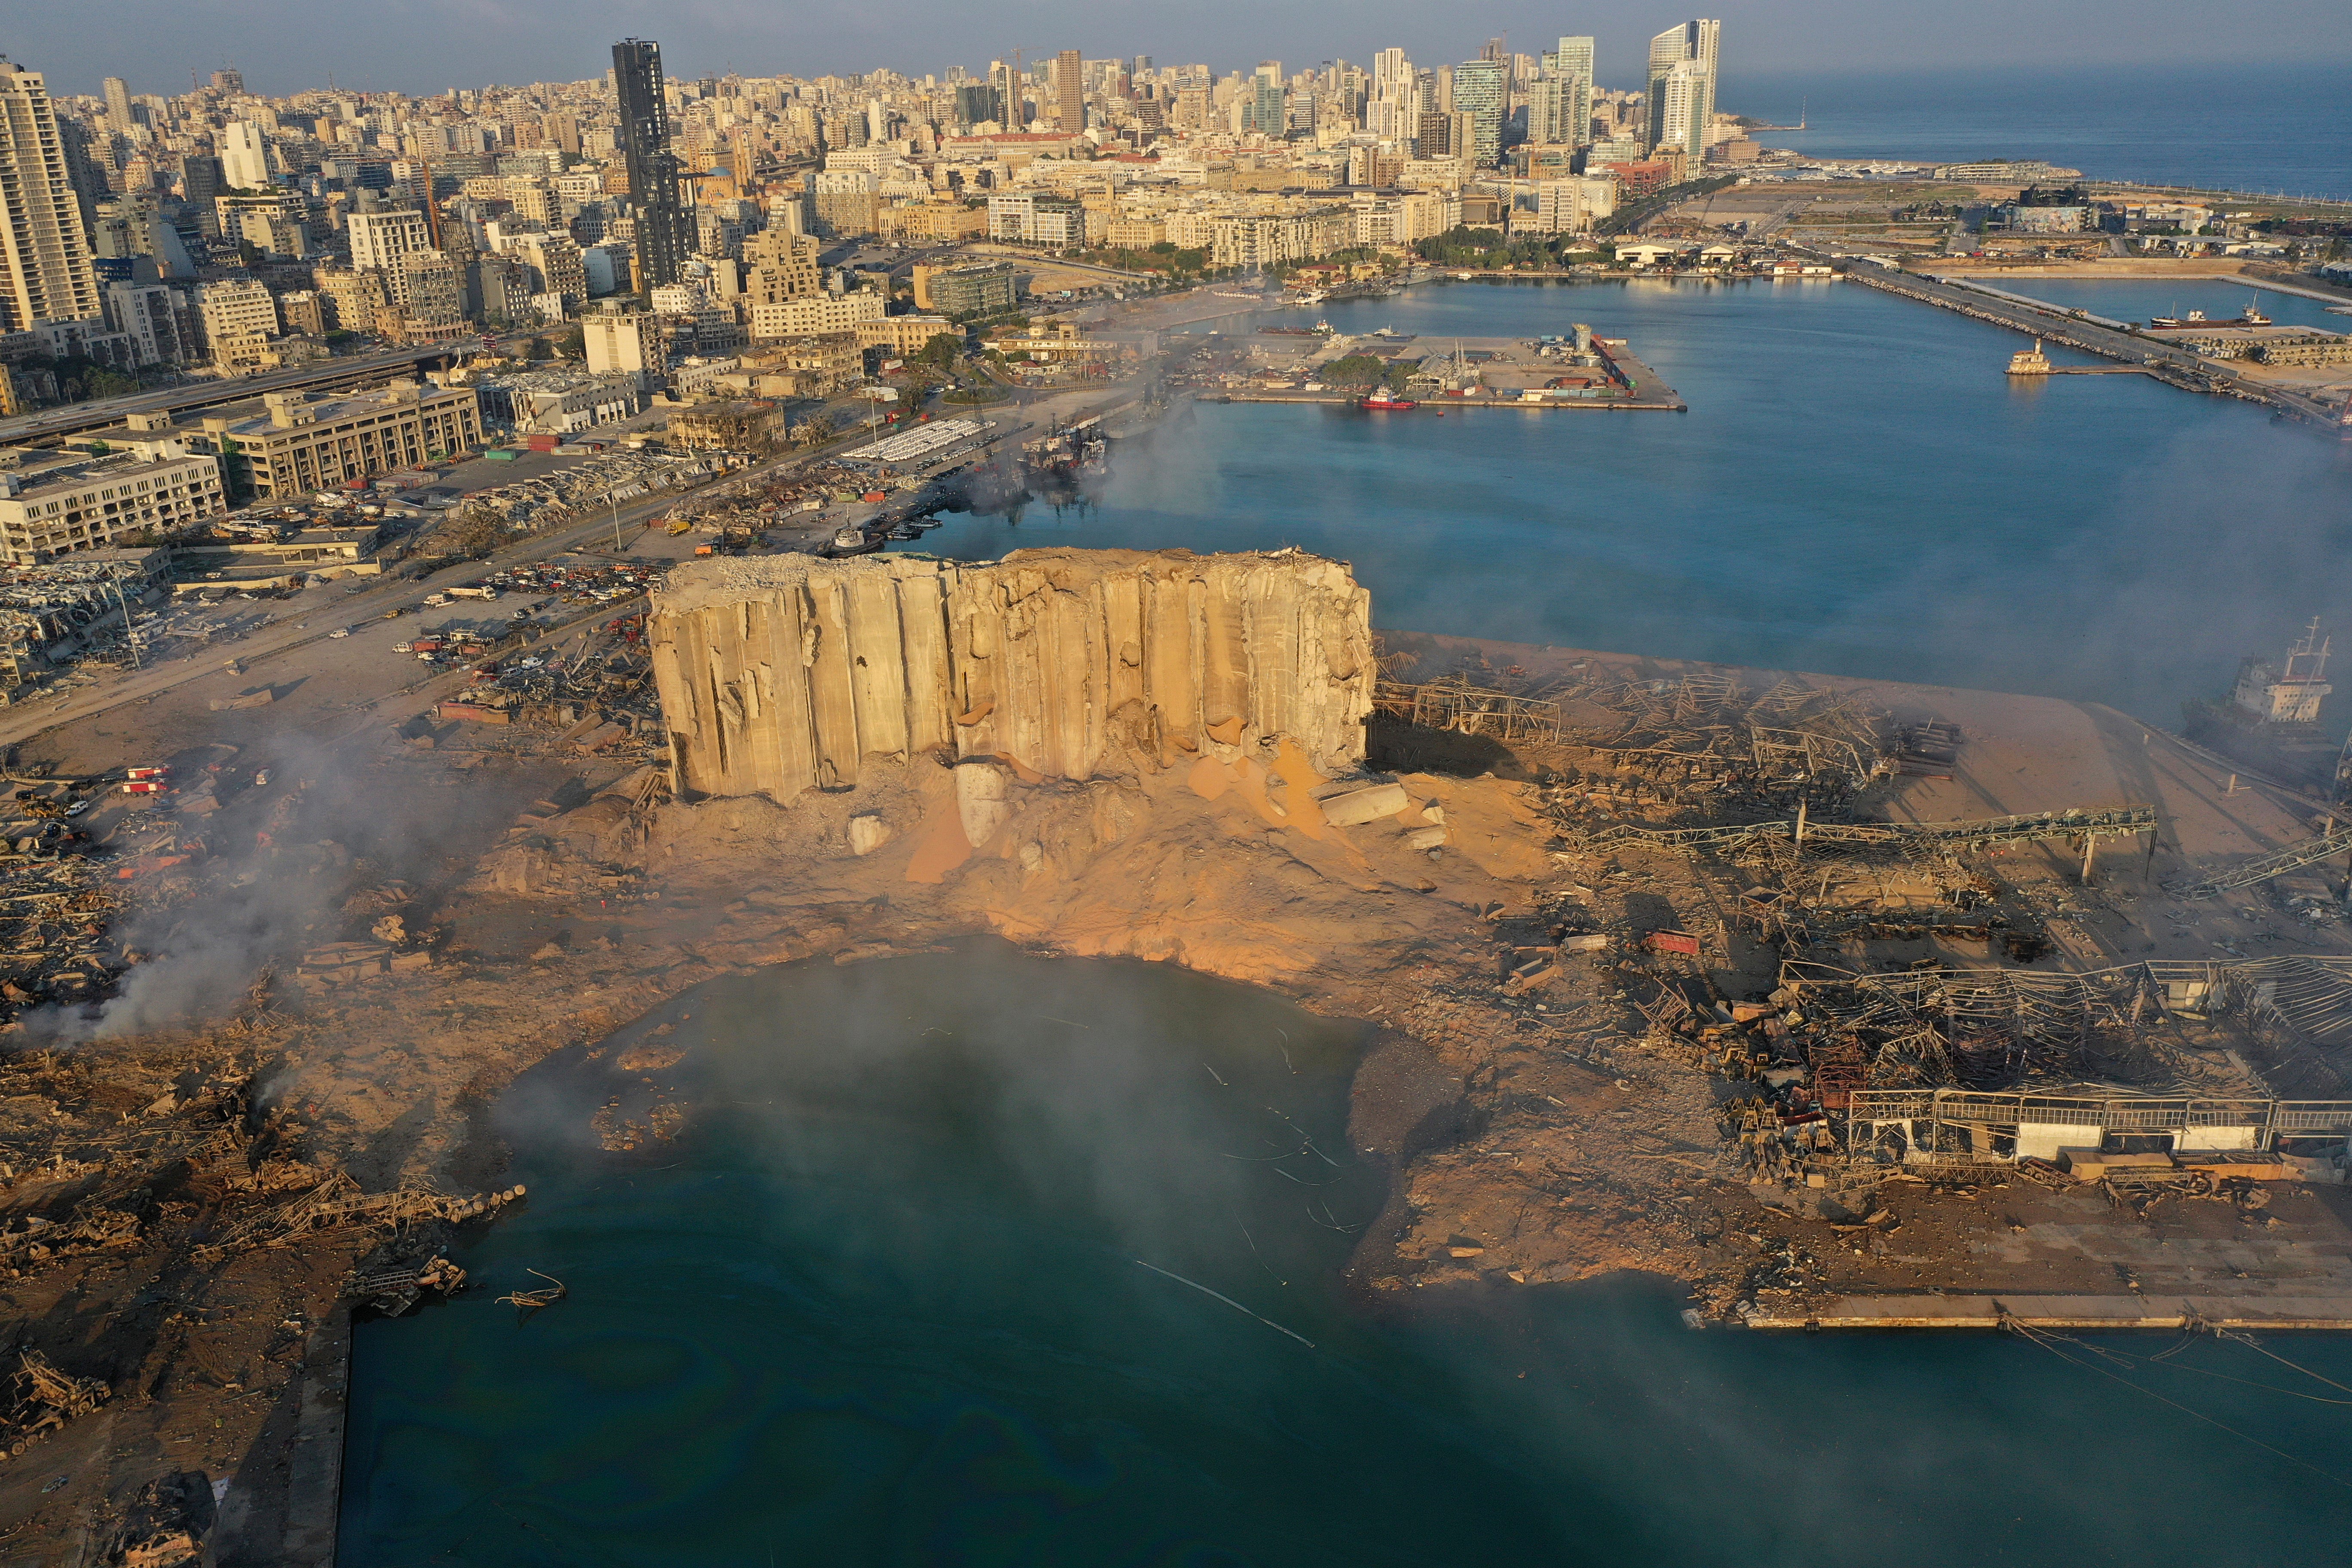 A drone picture shows the scene of an explosion that hit the seaport of Beirut, Lebanon, Wednesday, Aug. 5, 2020. A massive explosion rocked Beirut on Tuesday, flattening much of the city's port, damaging buildings across the capital and sending a giant mushroom cloud into the sky.